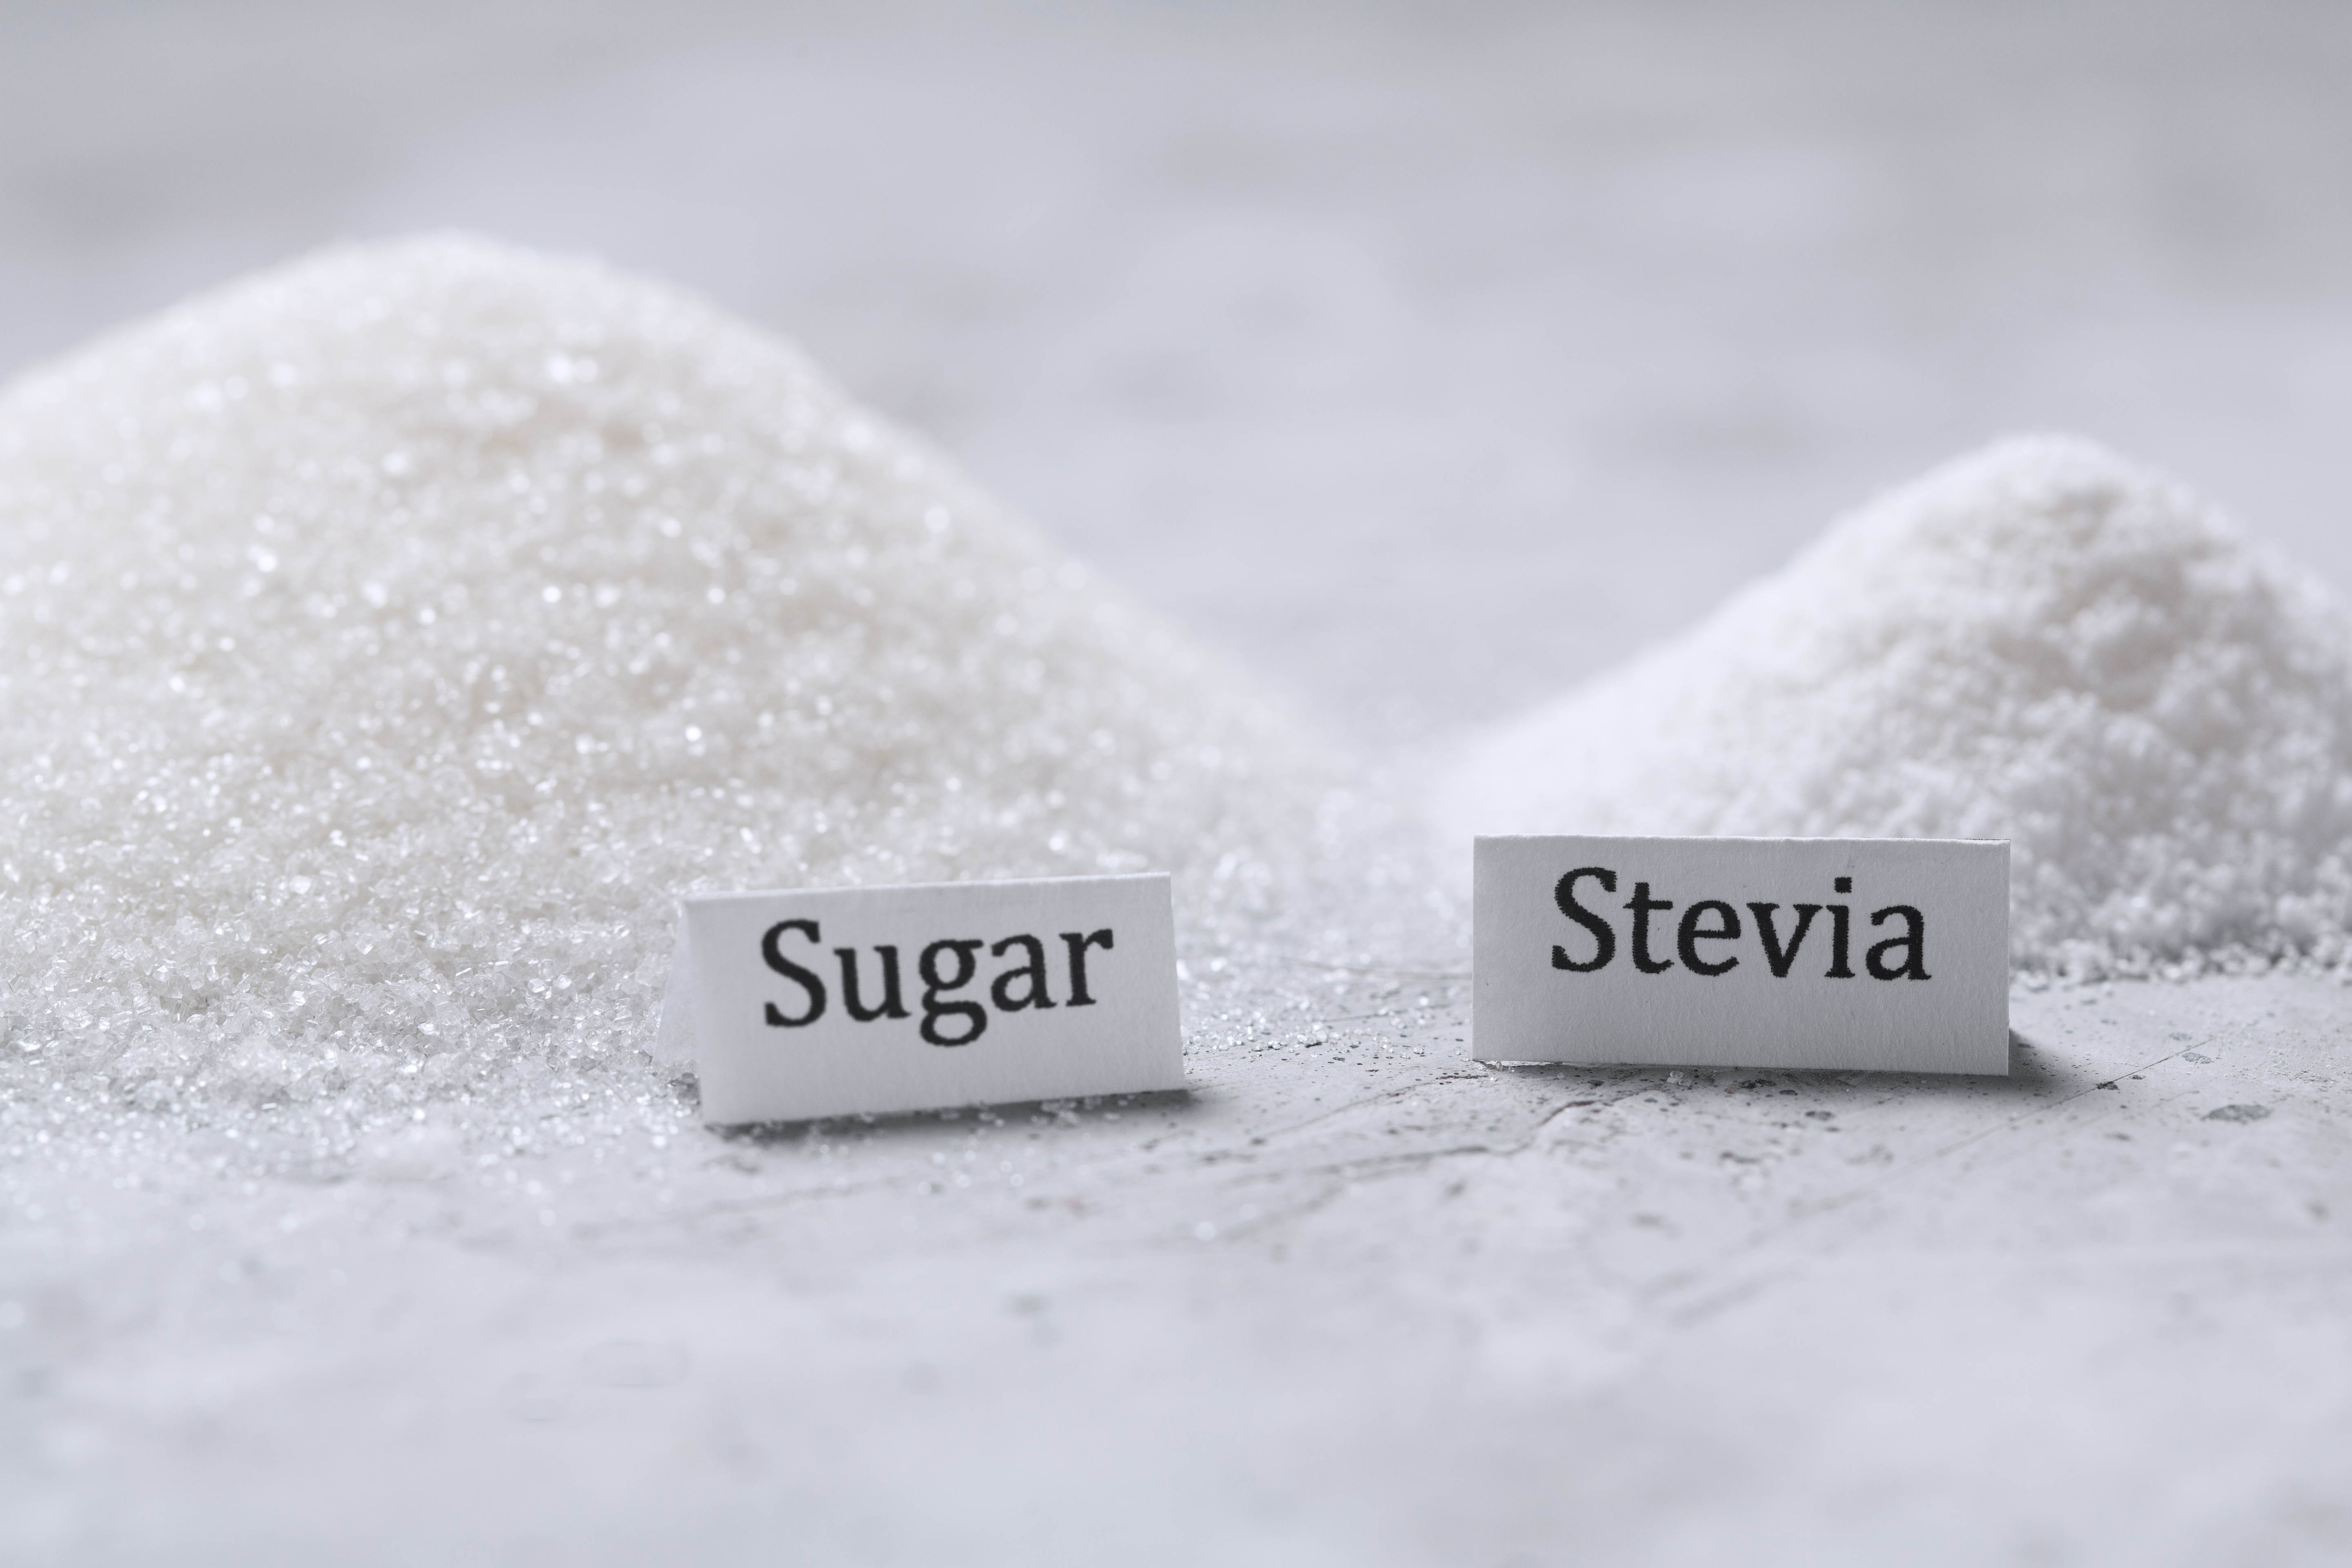 A pile of sugar and stevia sweetener with signatures